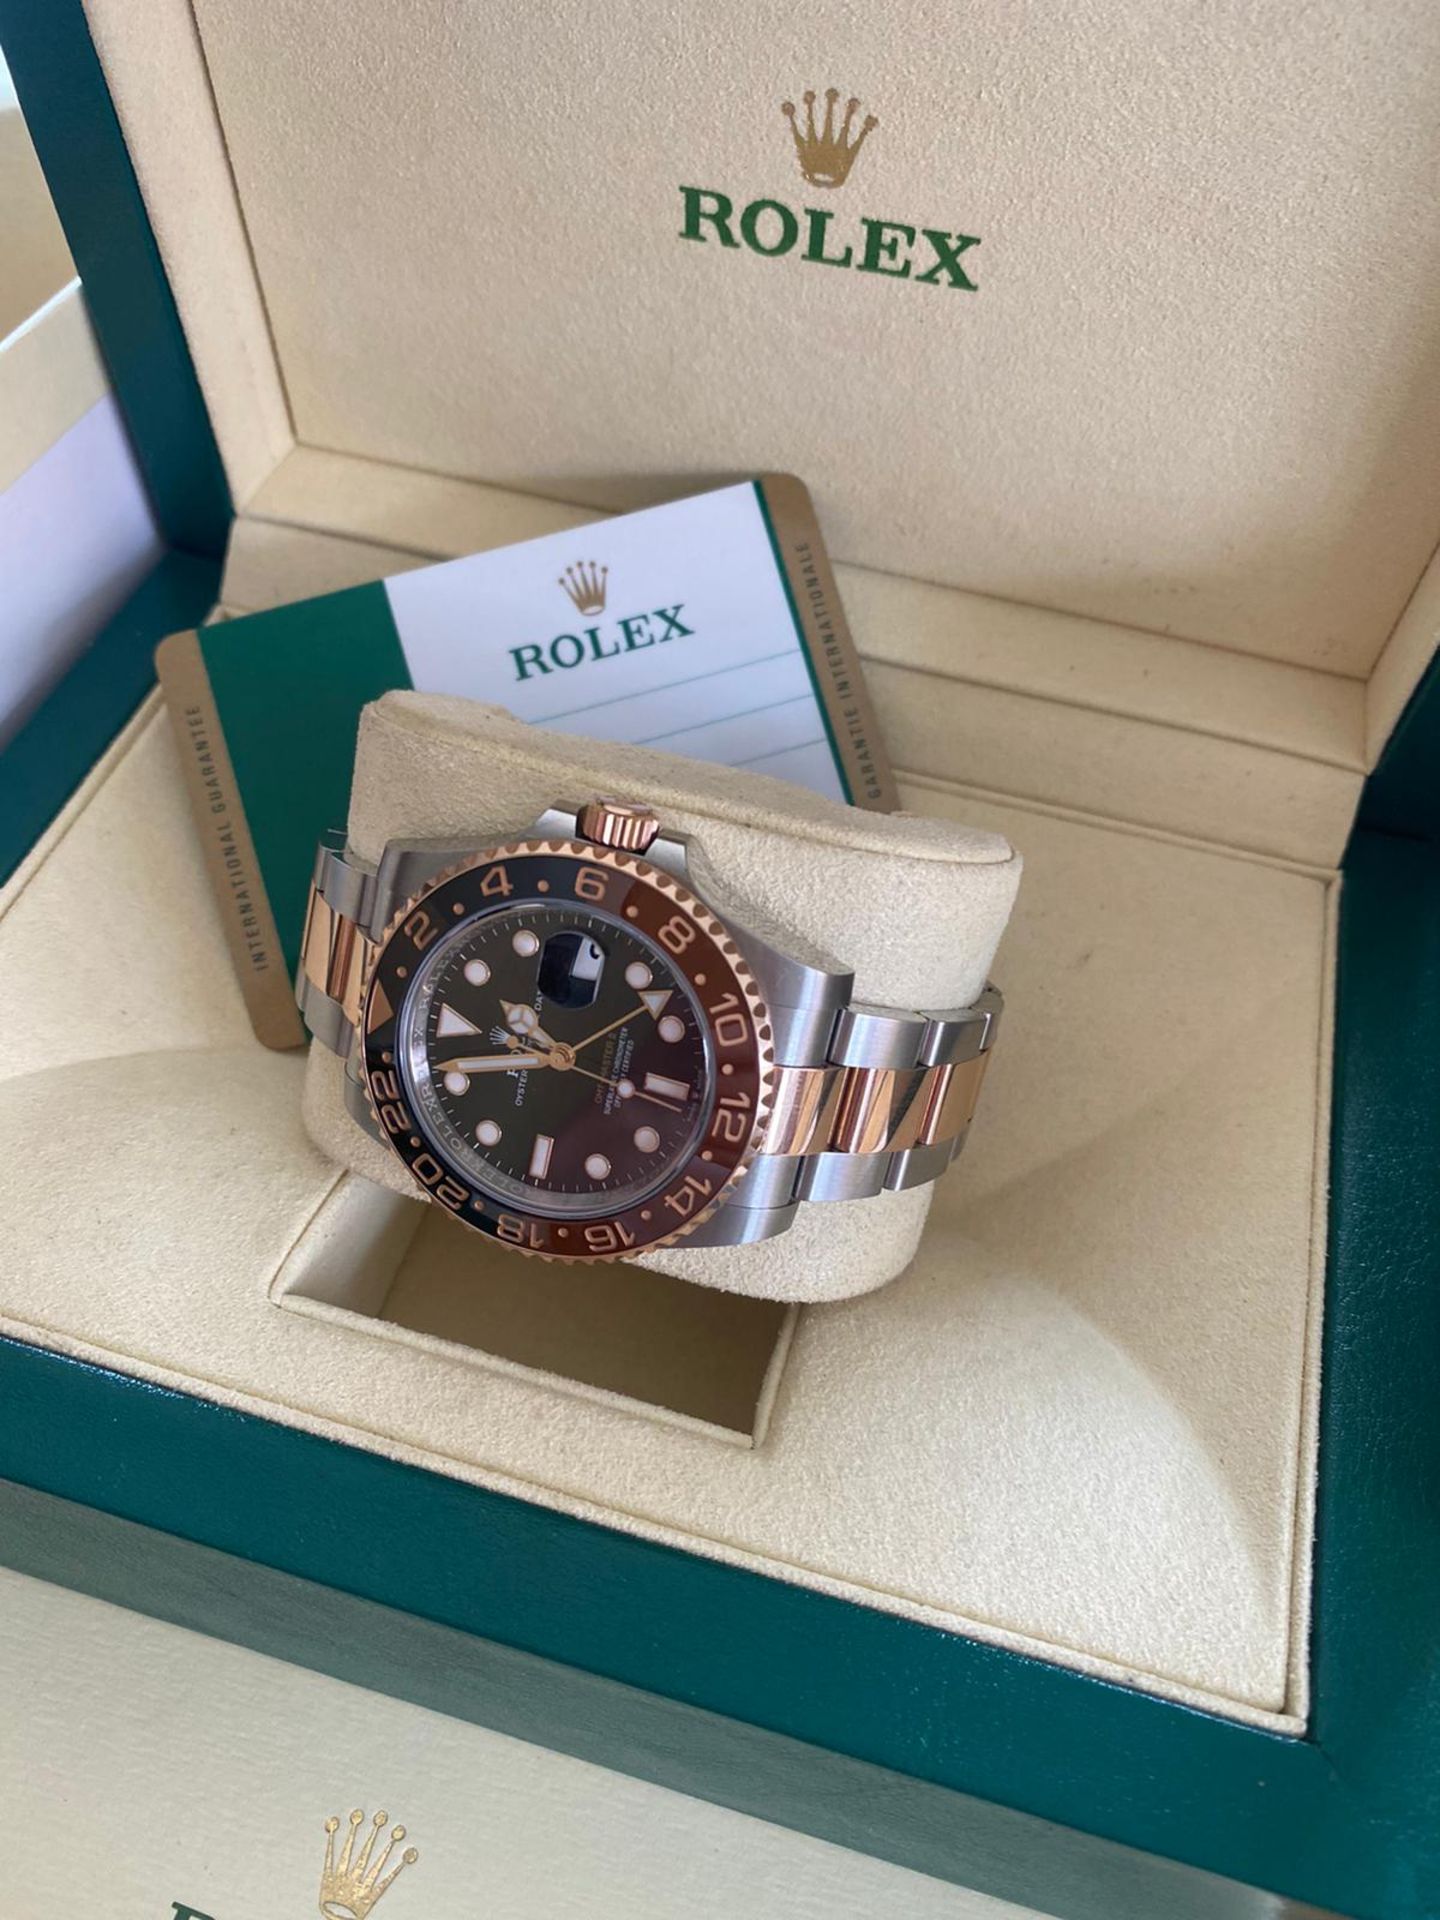 2019 ROLEX GMT MASTER II ROOT BEER WATCH LOCATION NORTH YORKSHIRE - Image 3 of 4